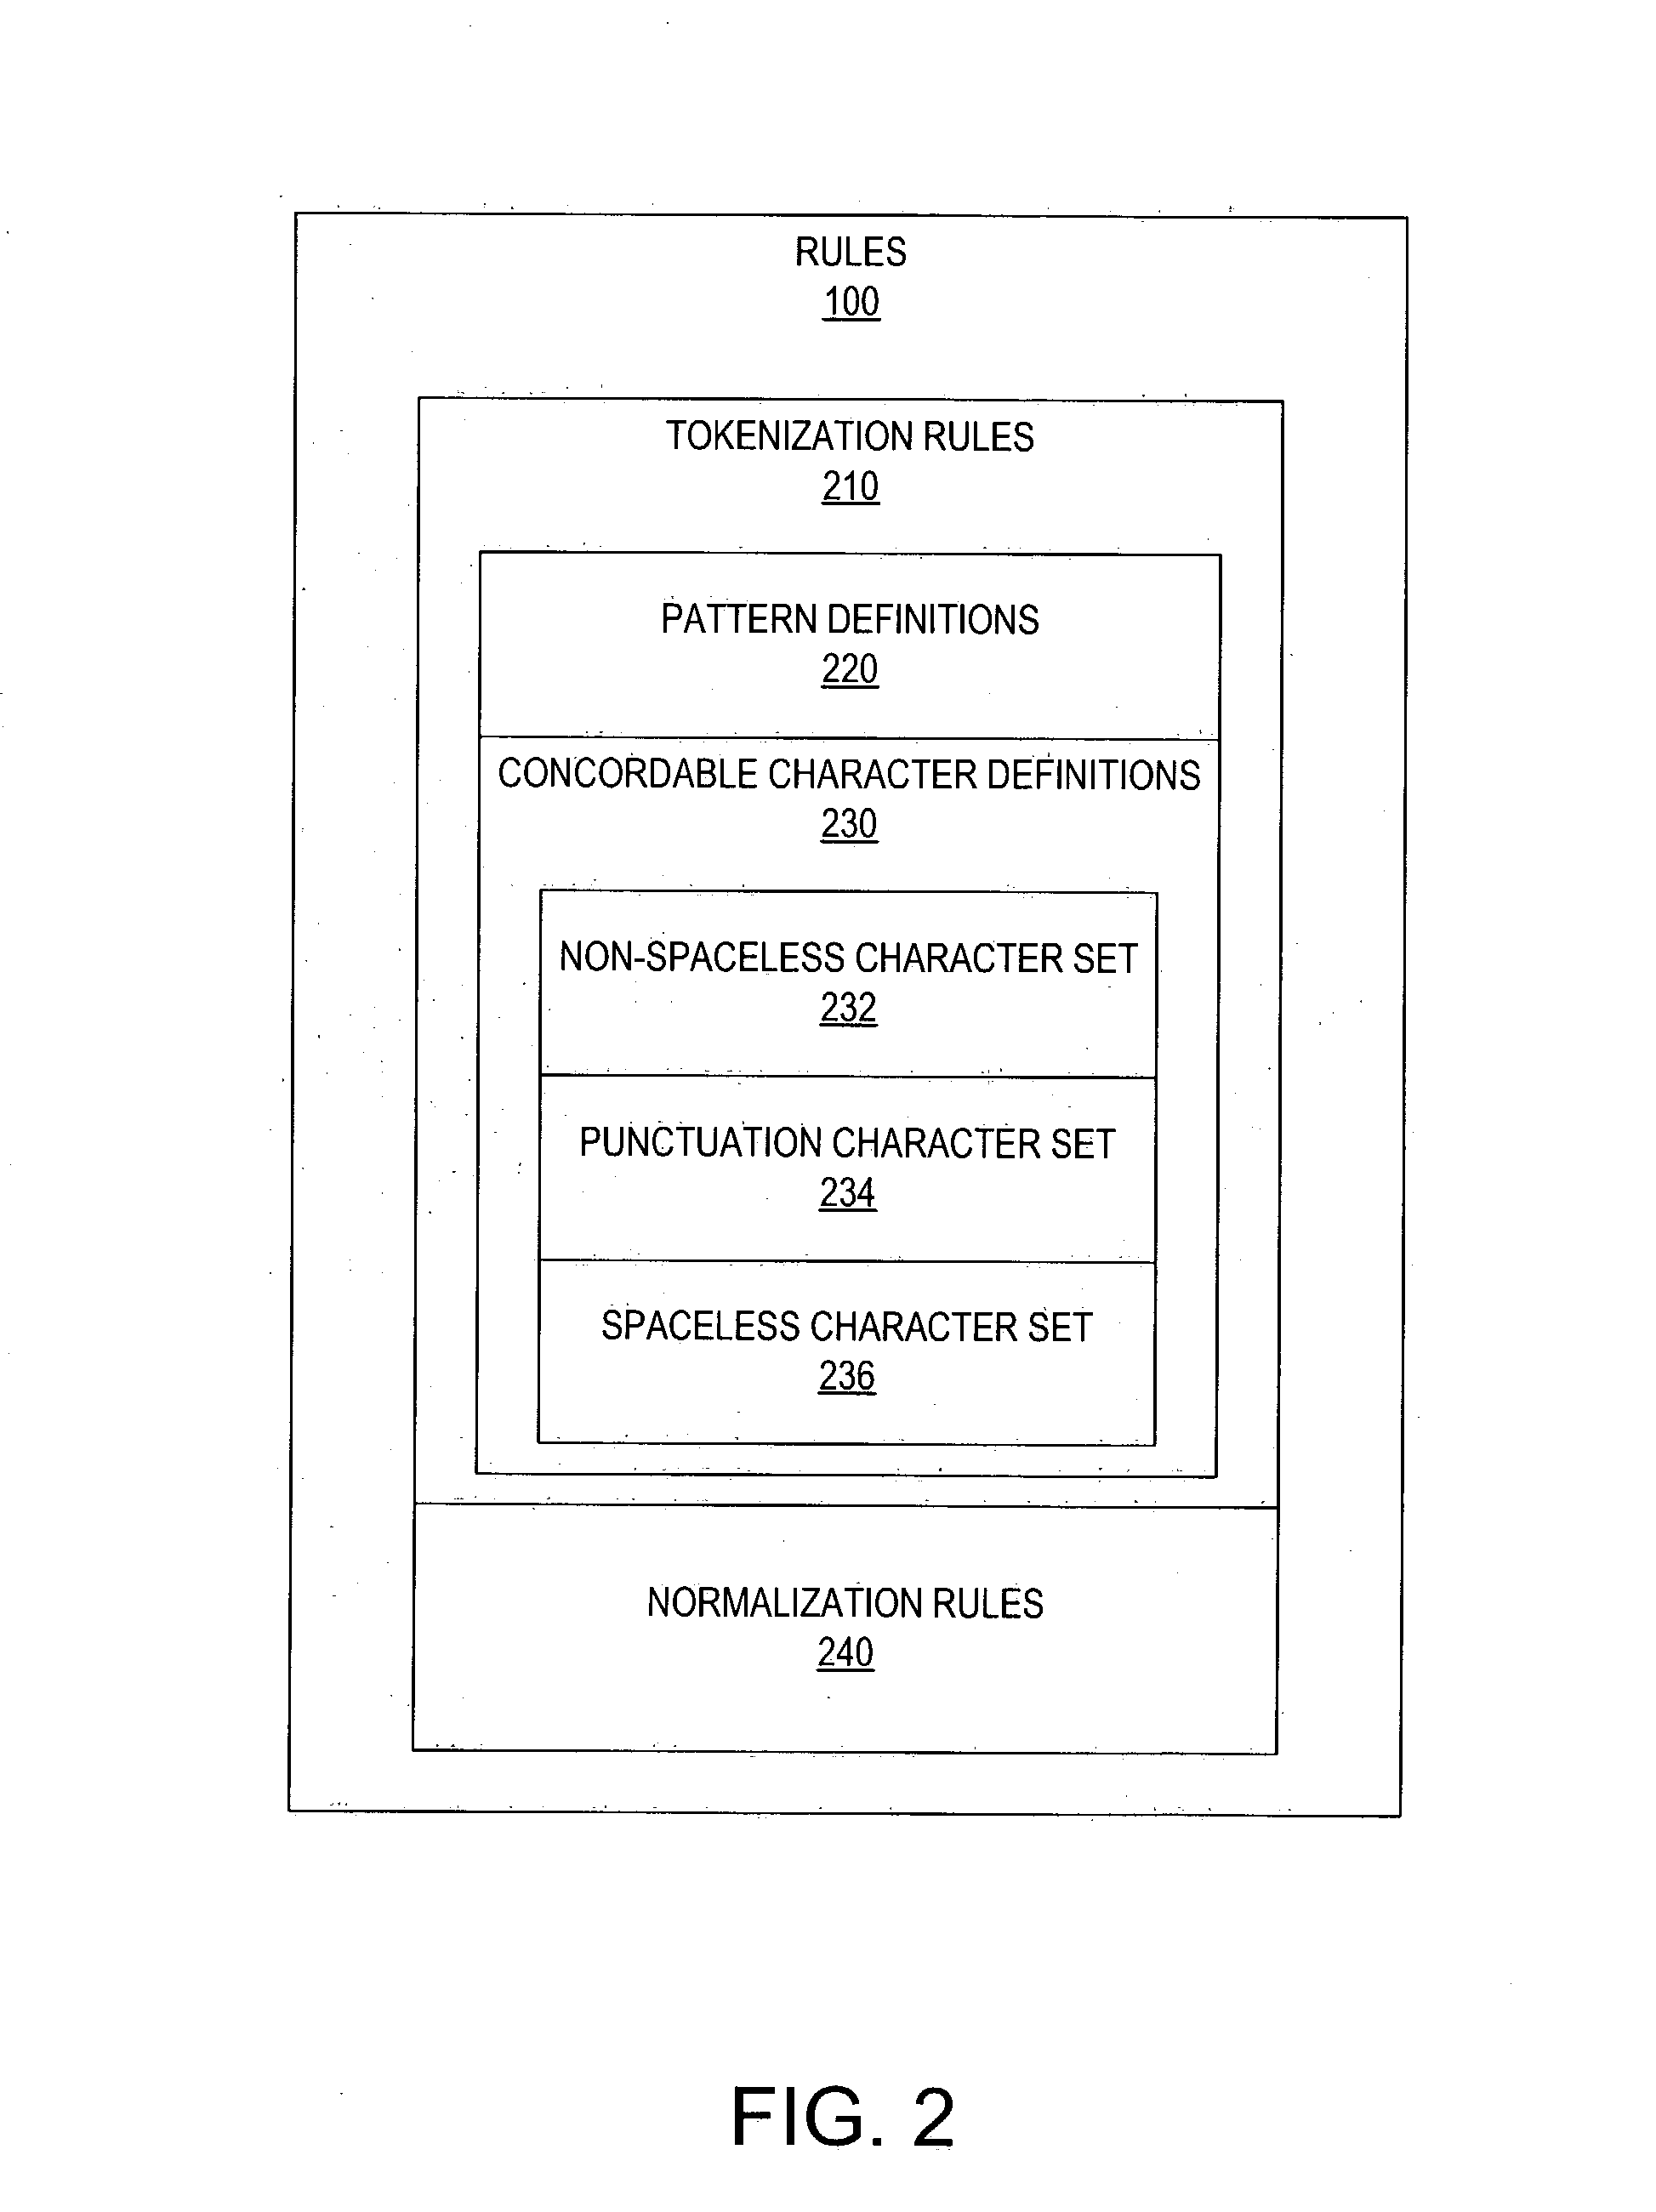 Apparatus and method for generating data useful in indexing and searching